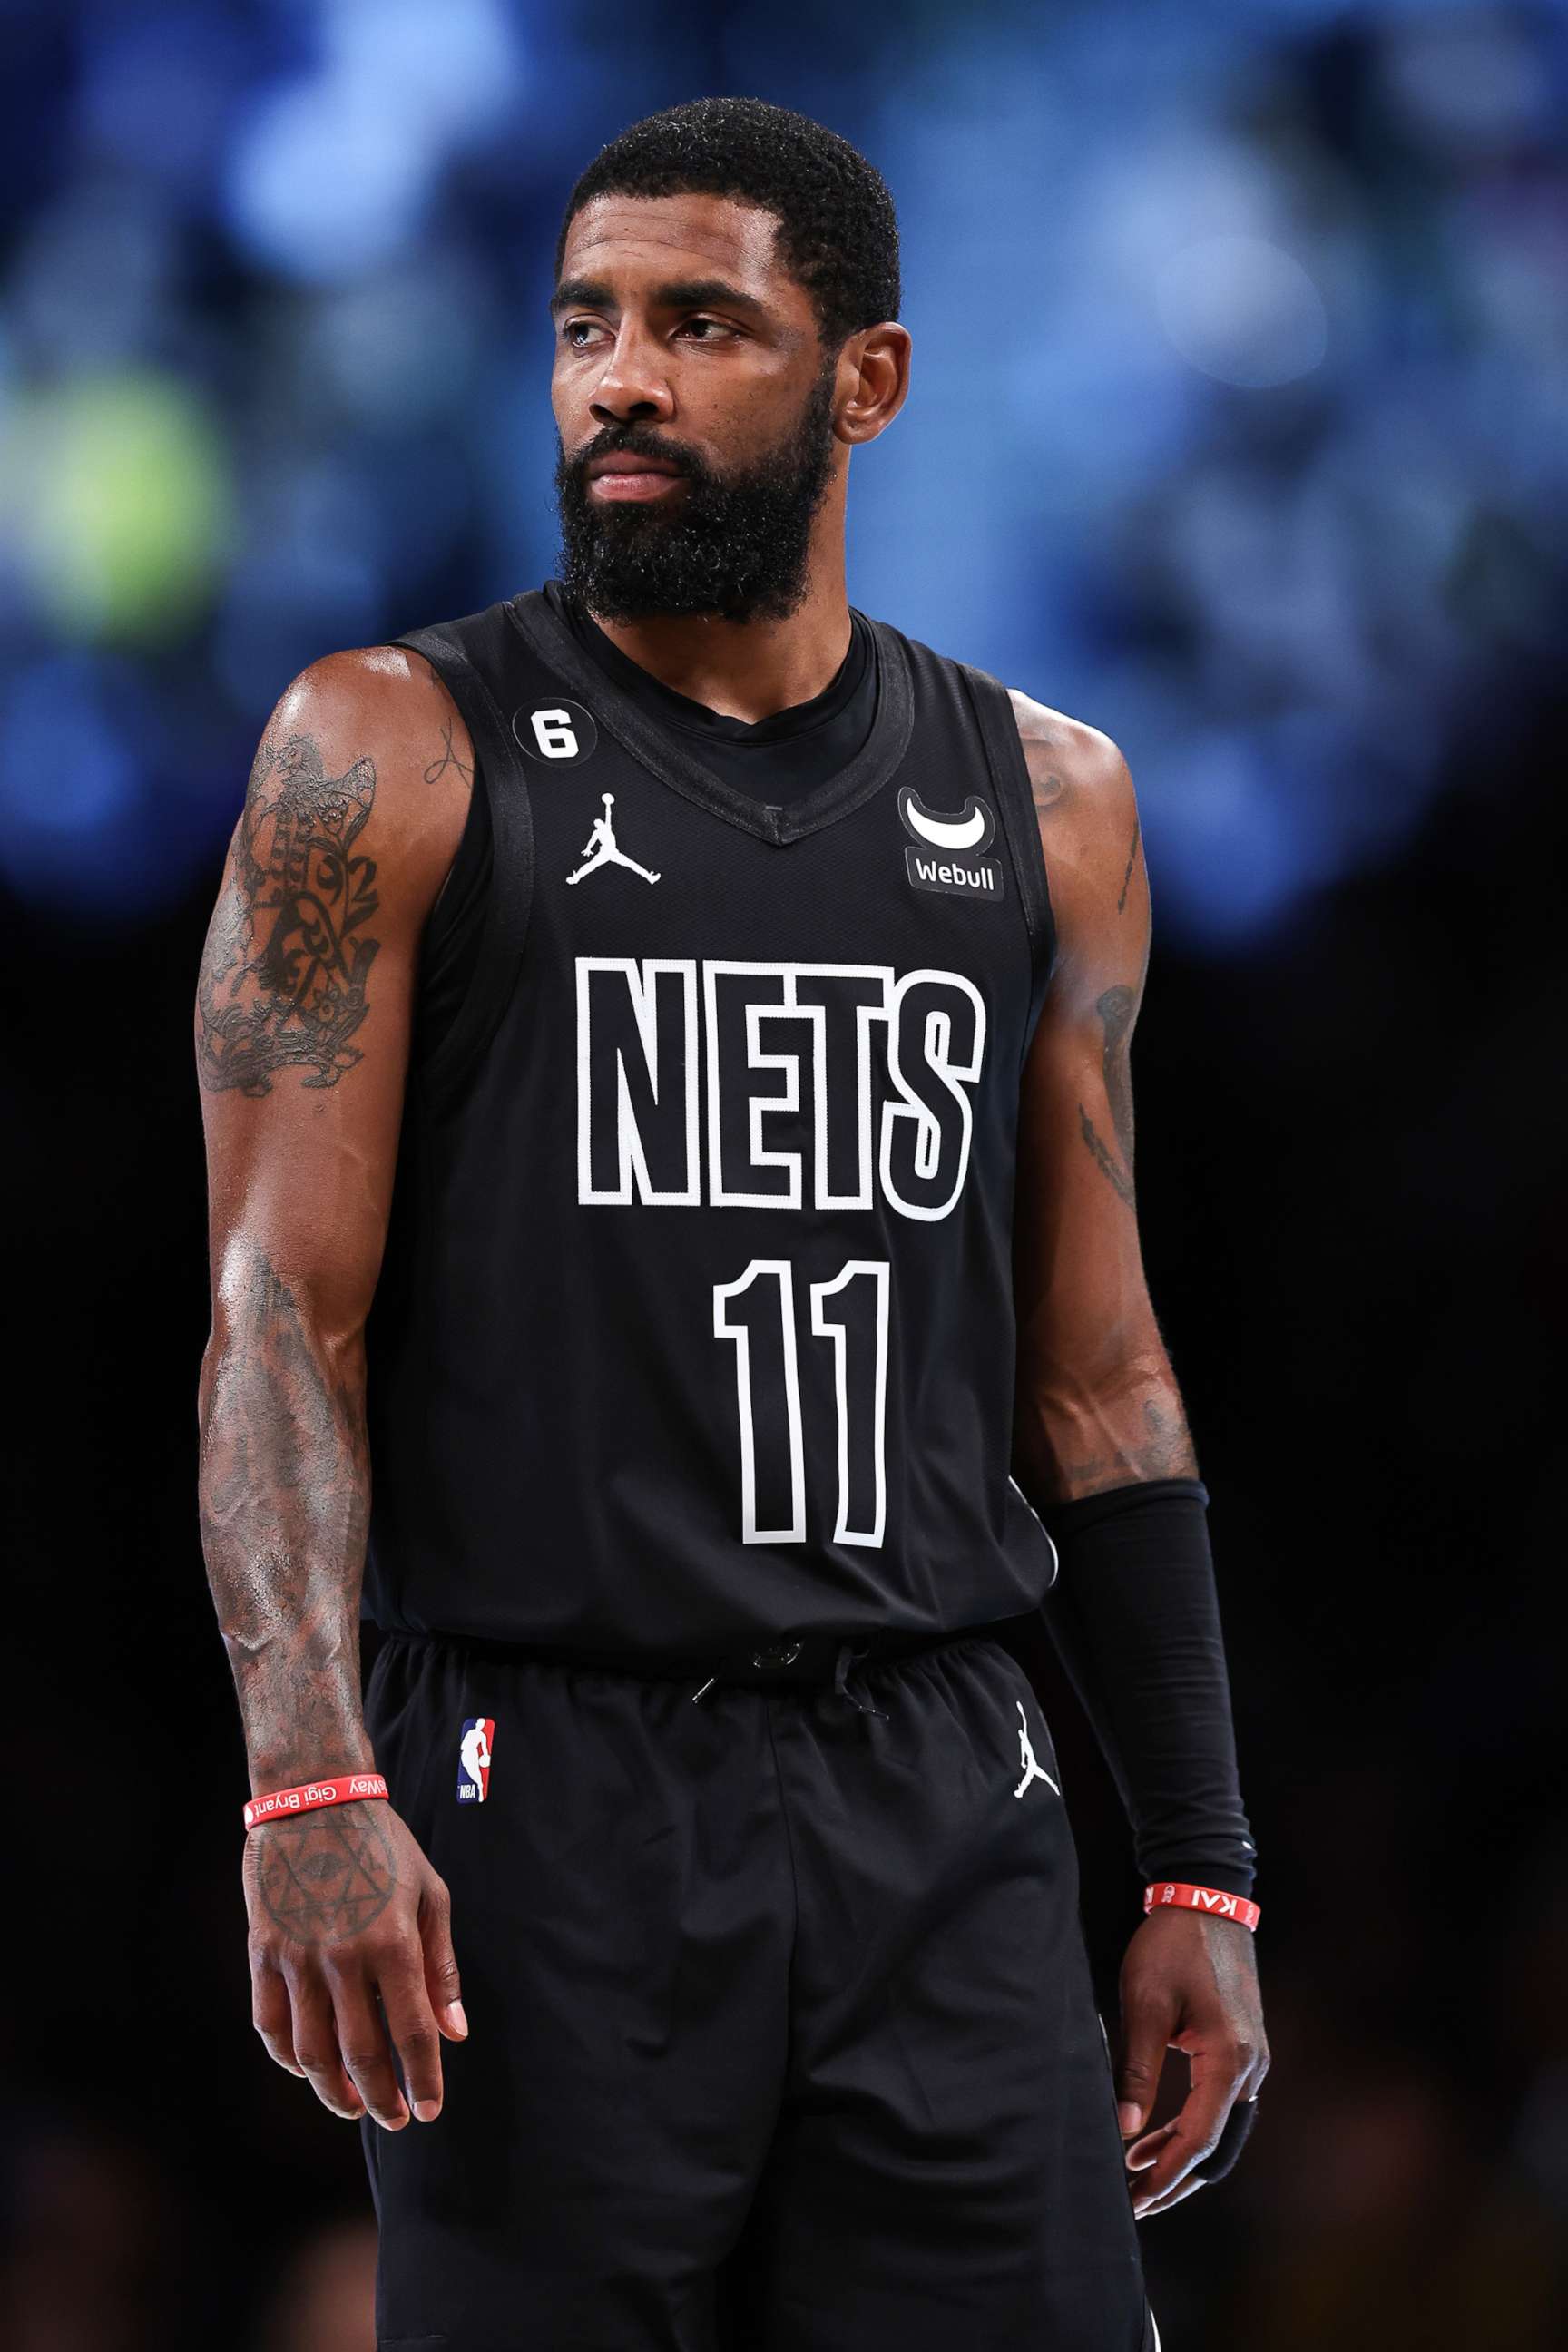 PHOTO: Kyrie Irving #11 of the Brooklyn Nets looks on during a break in the action during the first quarter of the game in New York, Oct. 31, 2022.